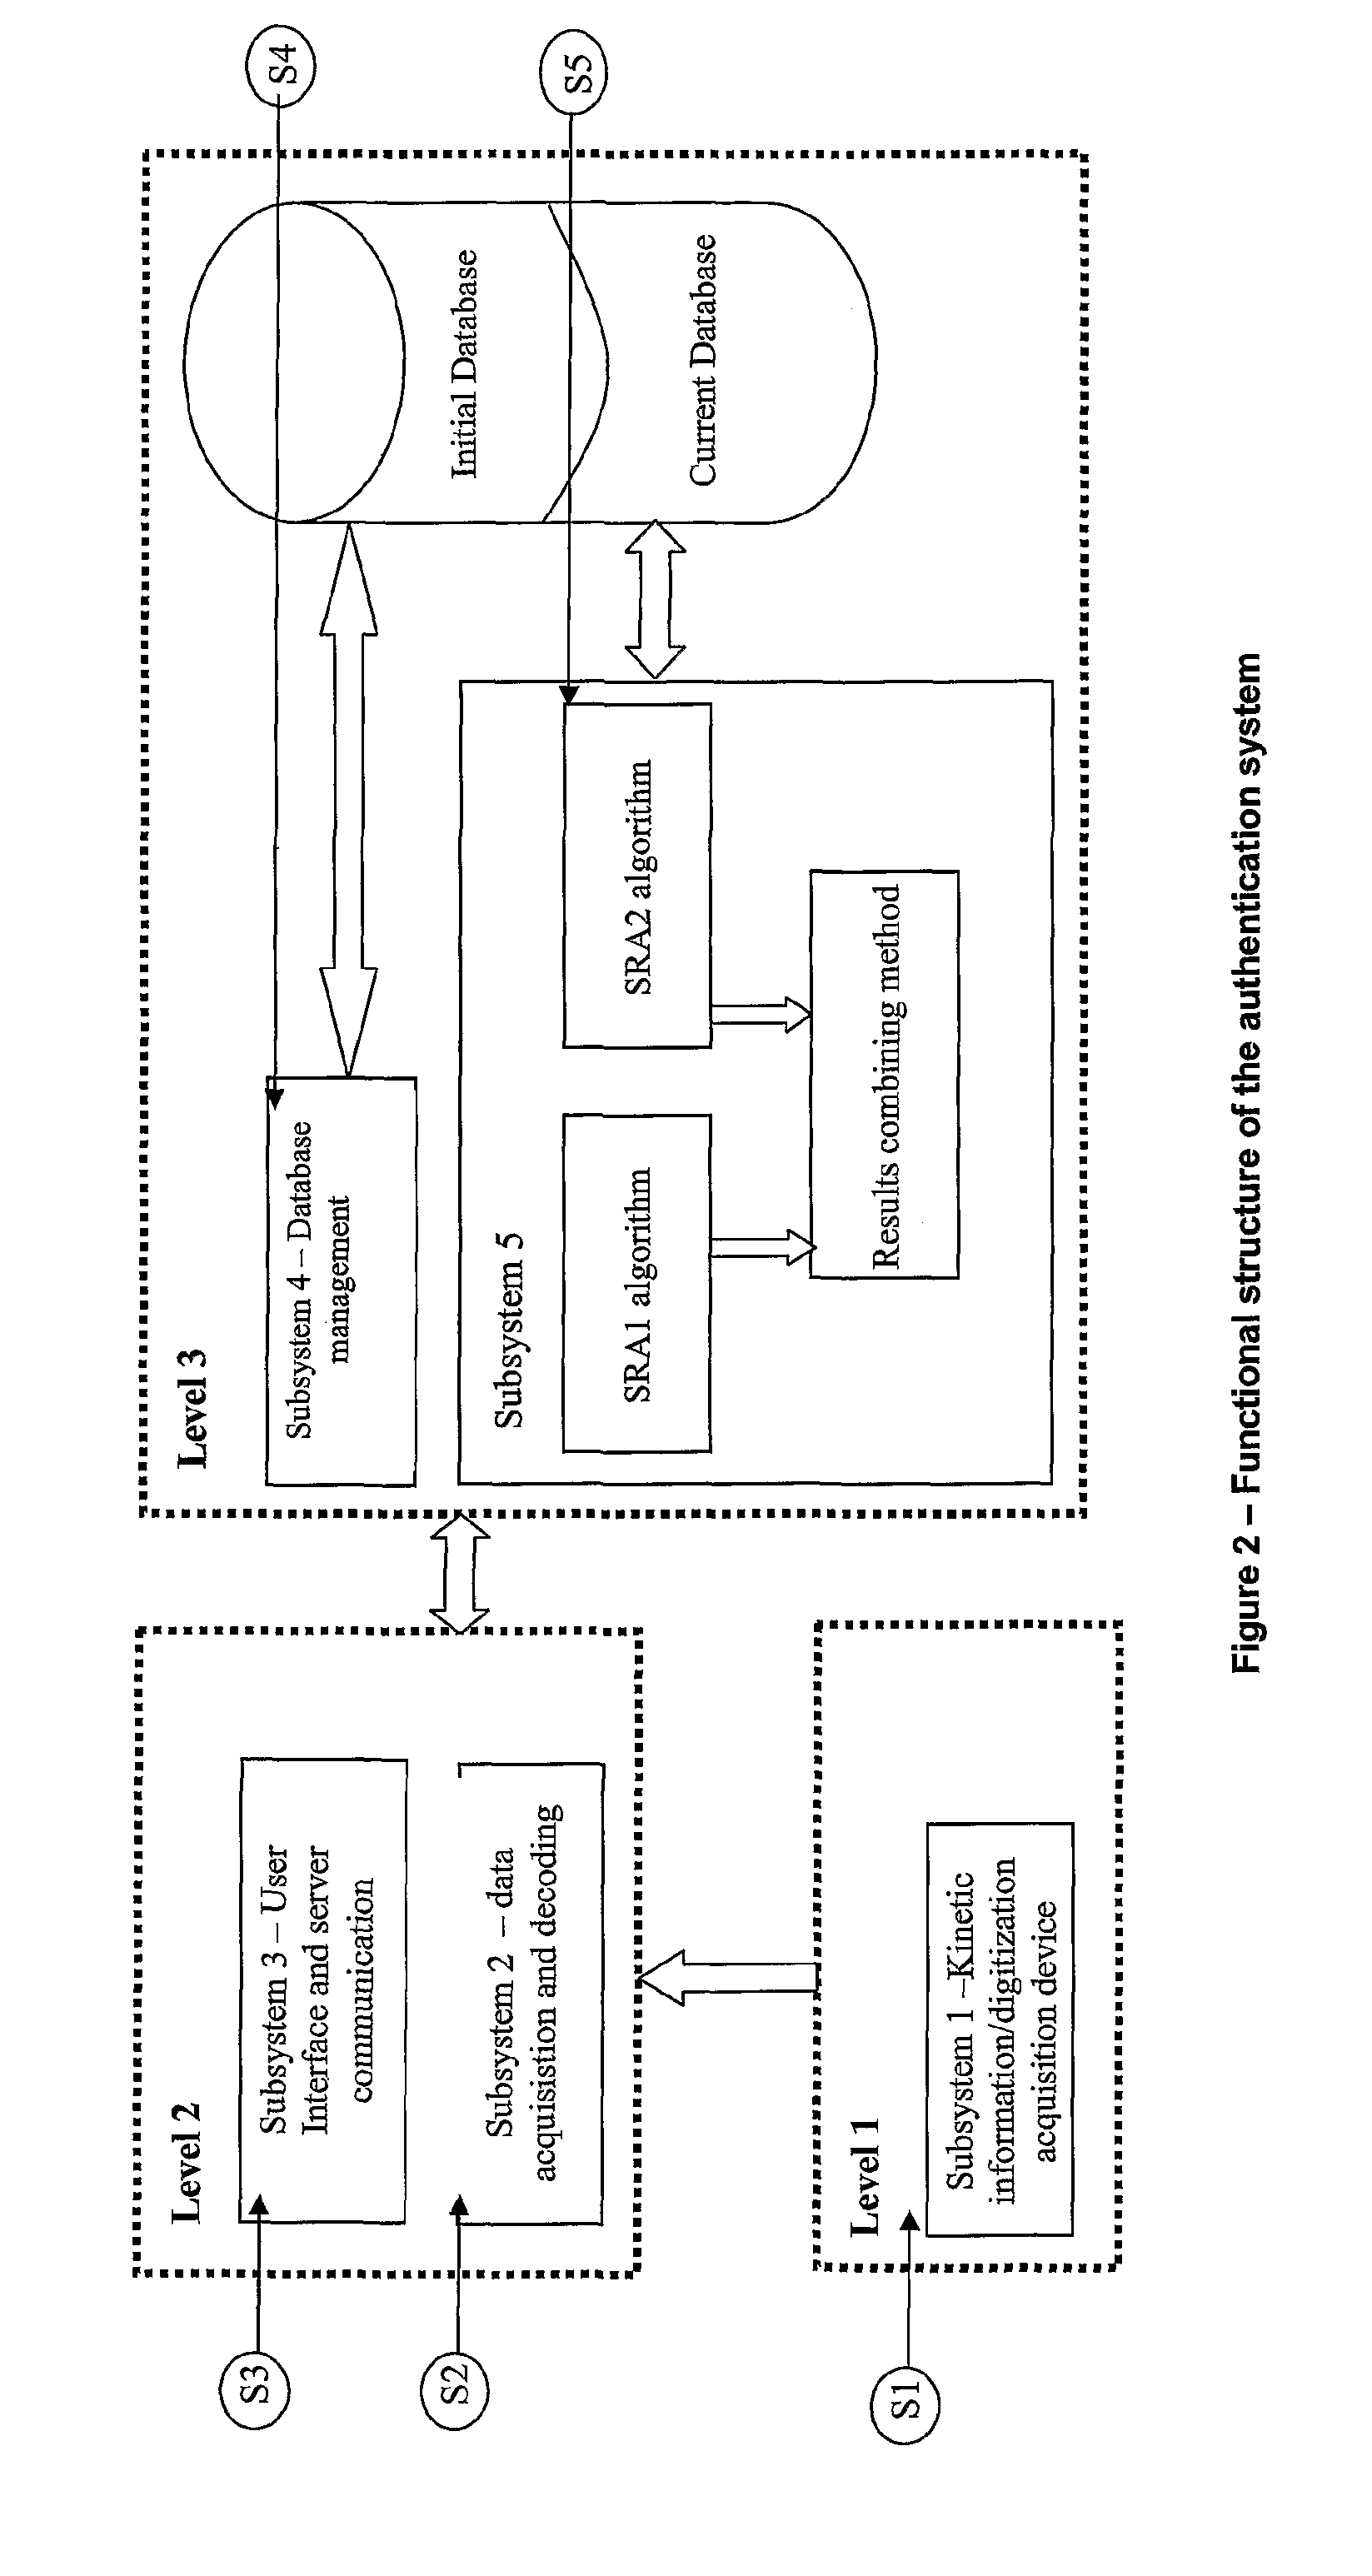 System and methods of acquisition, analysis and authentication of the handwritten signature